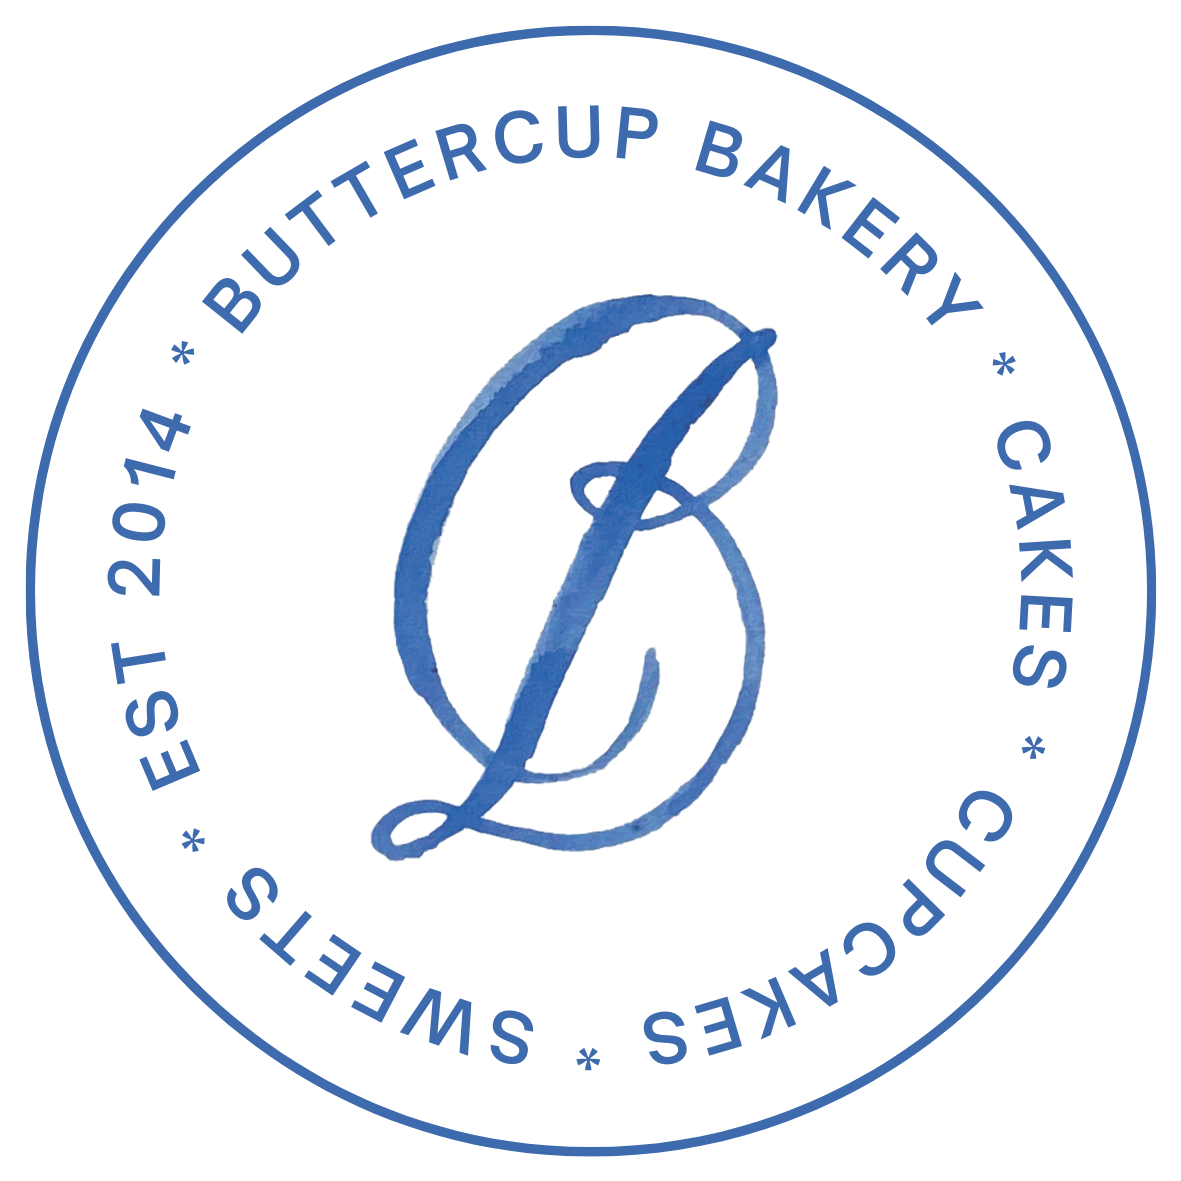 Gallery — Ms Buttercup Cakes